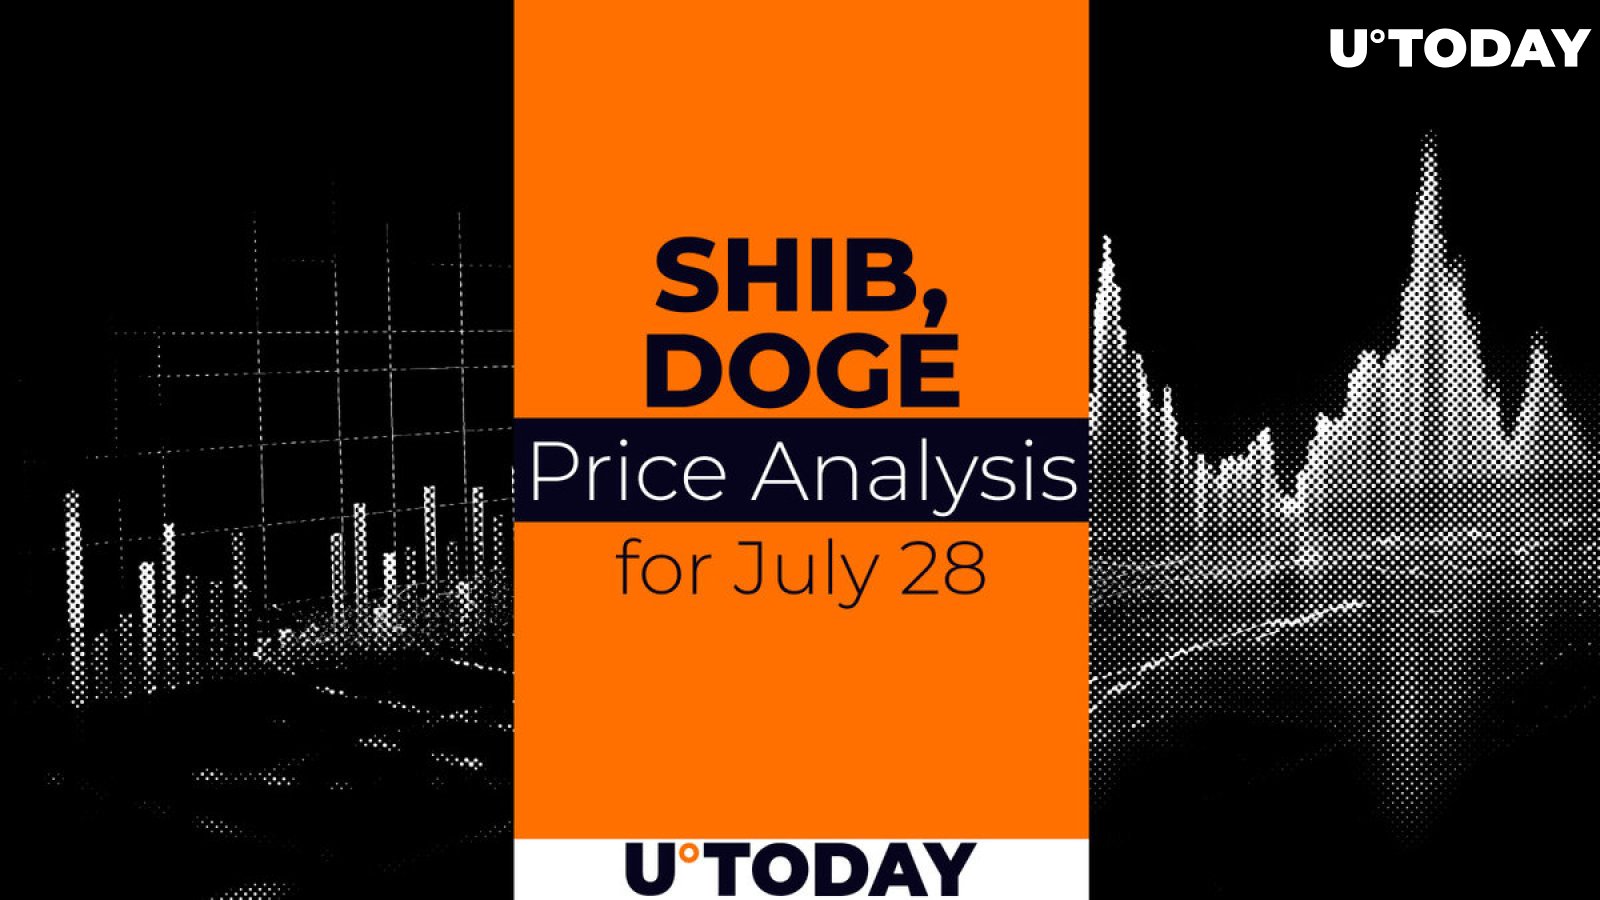 SHIB and DOGE Prediction for July 28